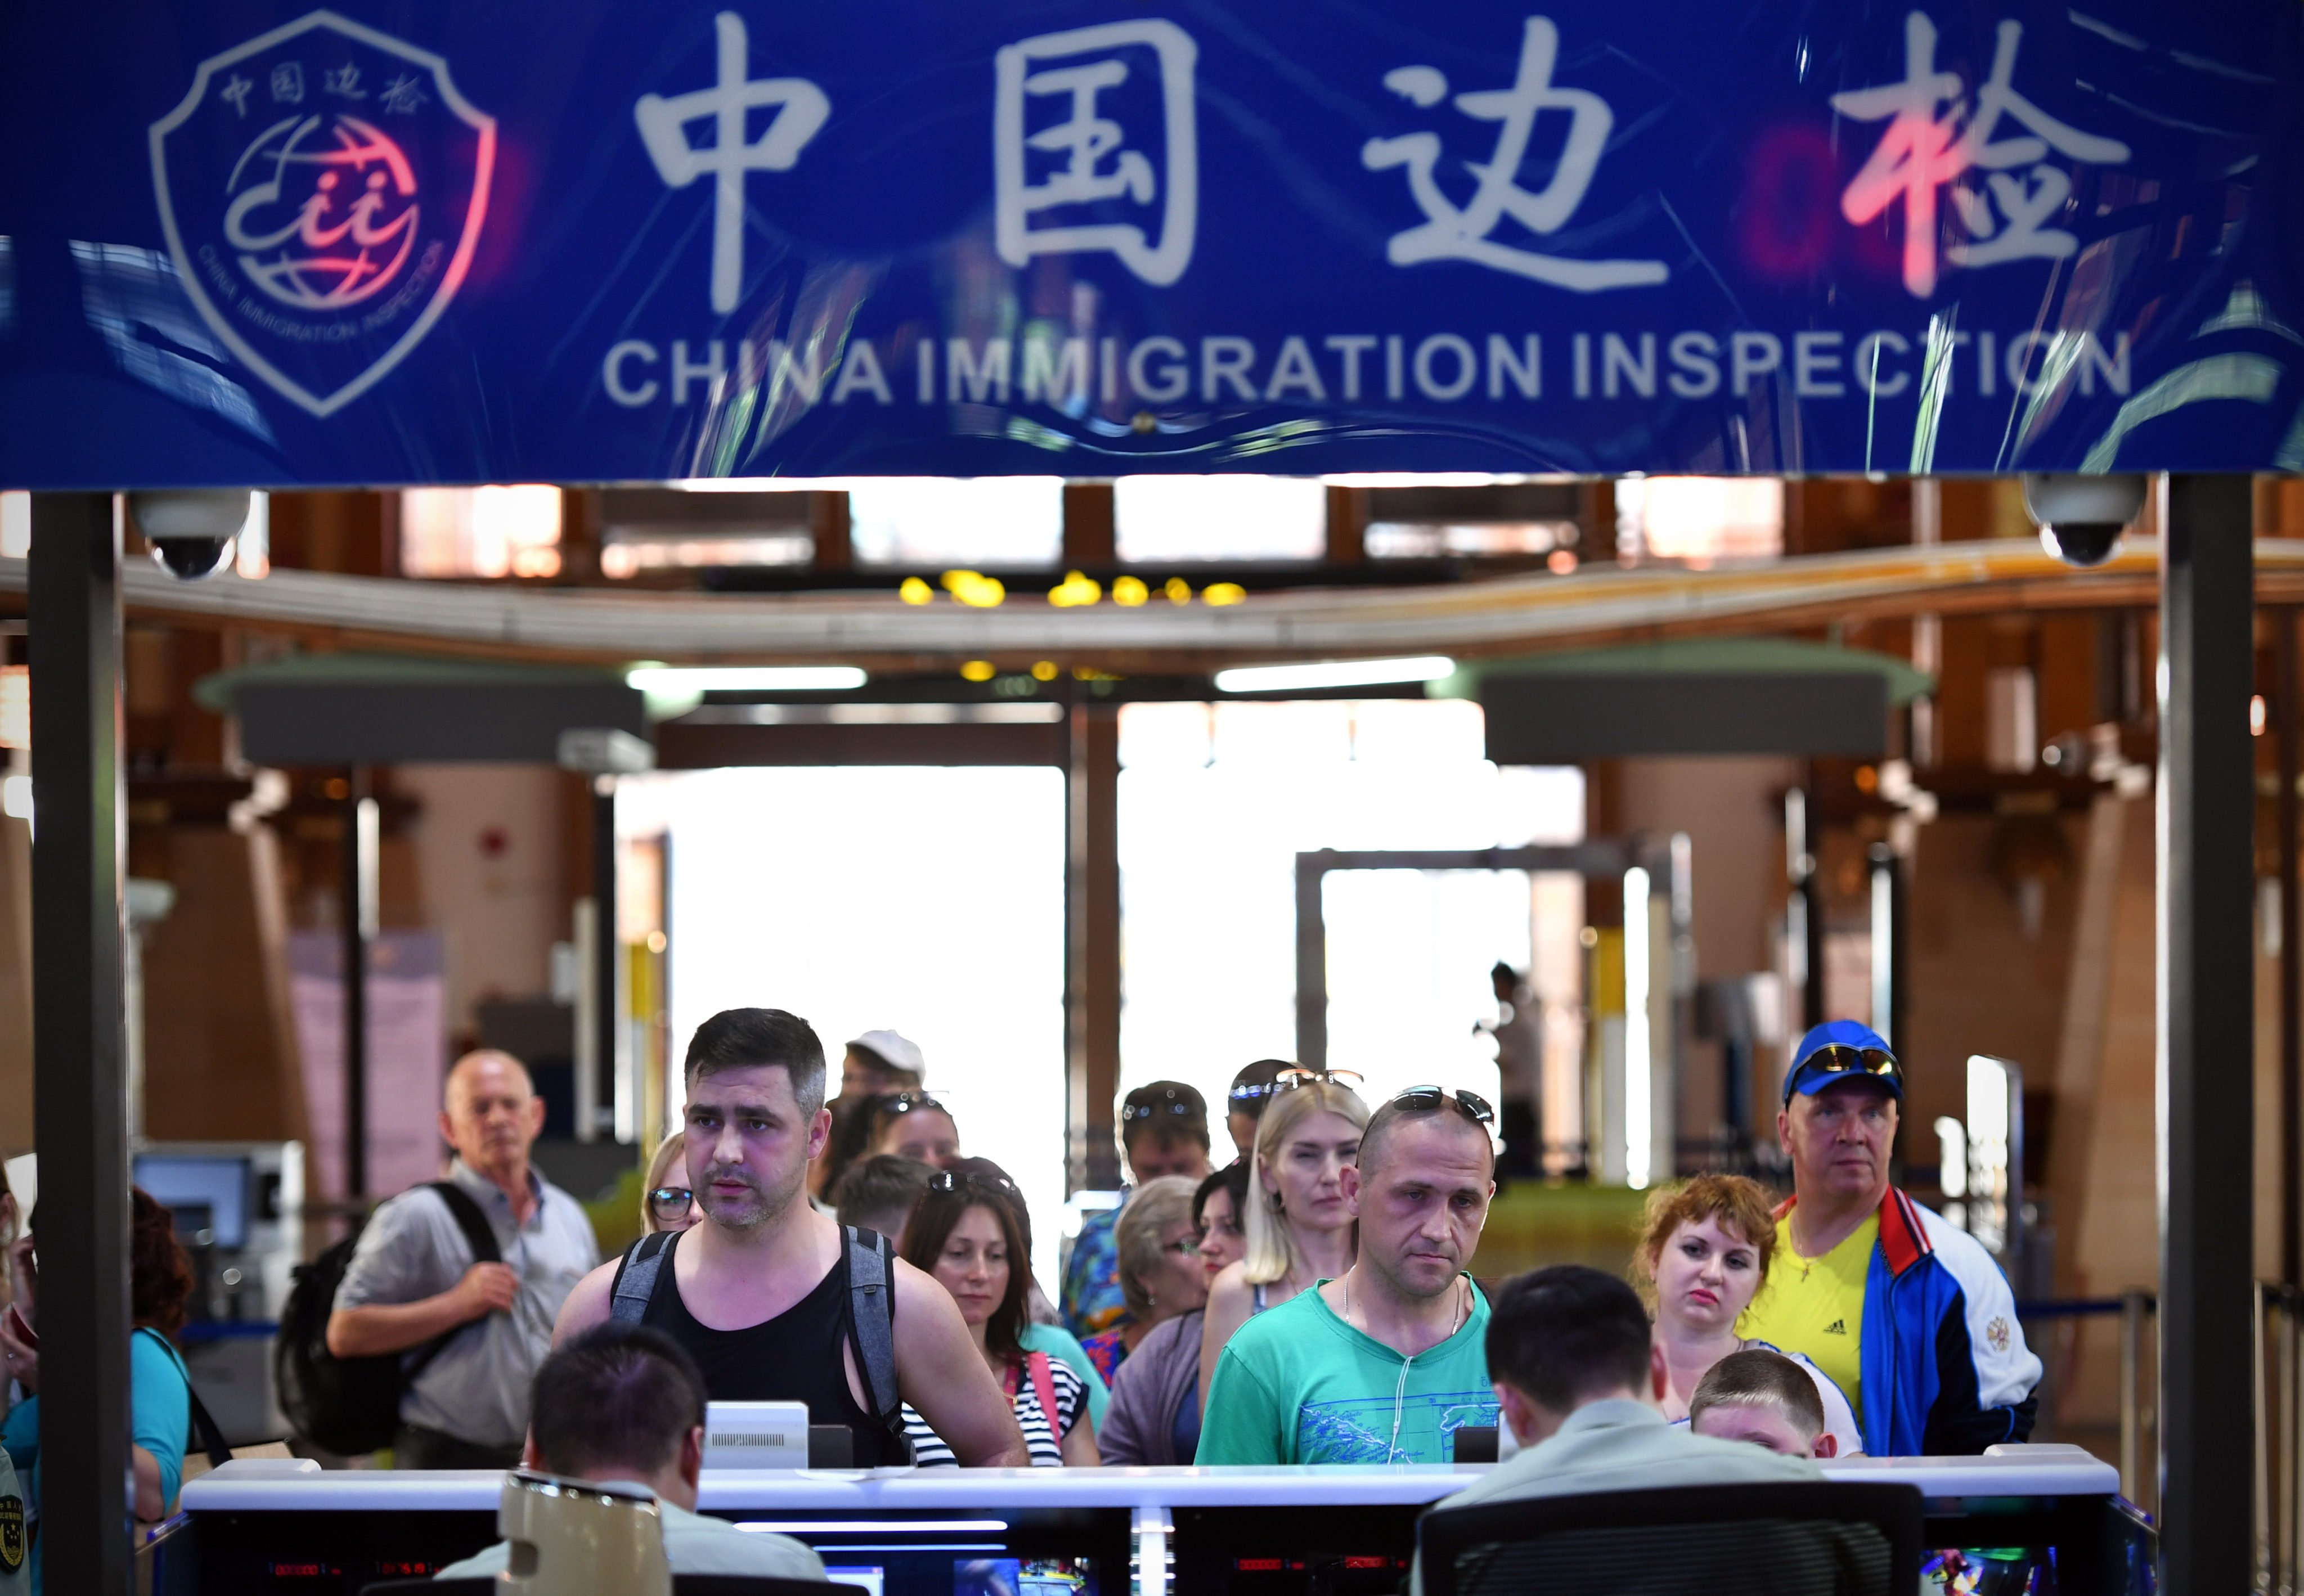 Tourists arrive at the airport in Sanya, south China’s Hainan province, in 2018. Photo: Xinhua